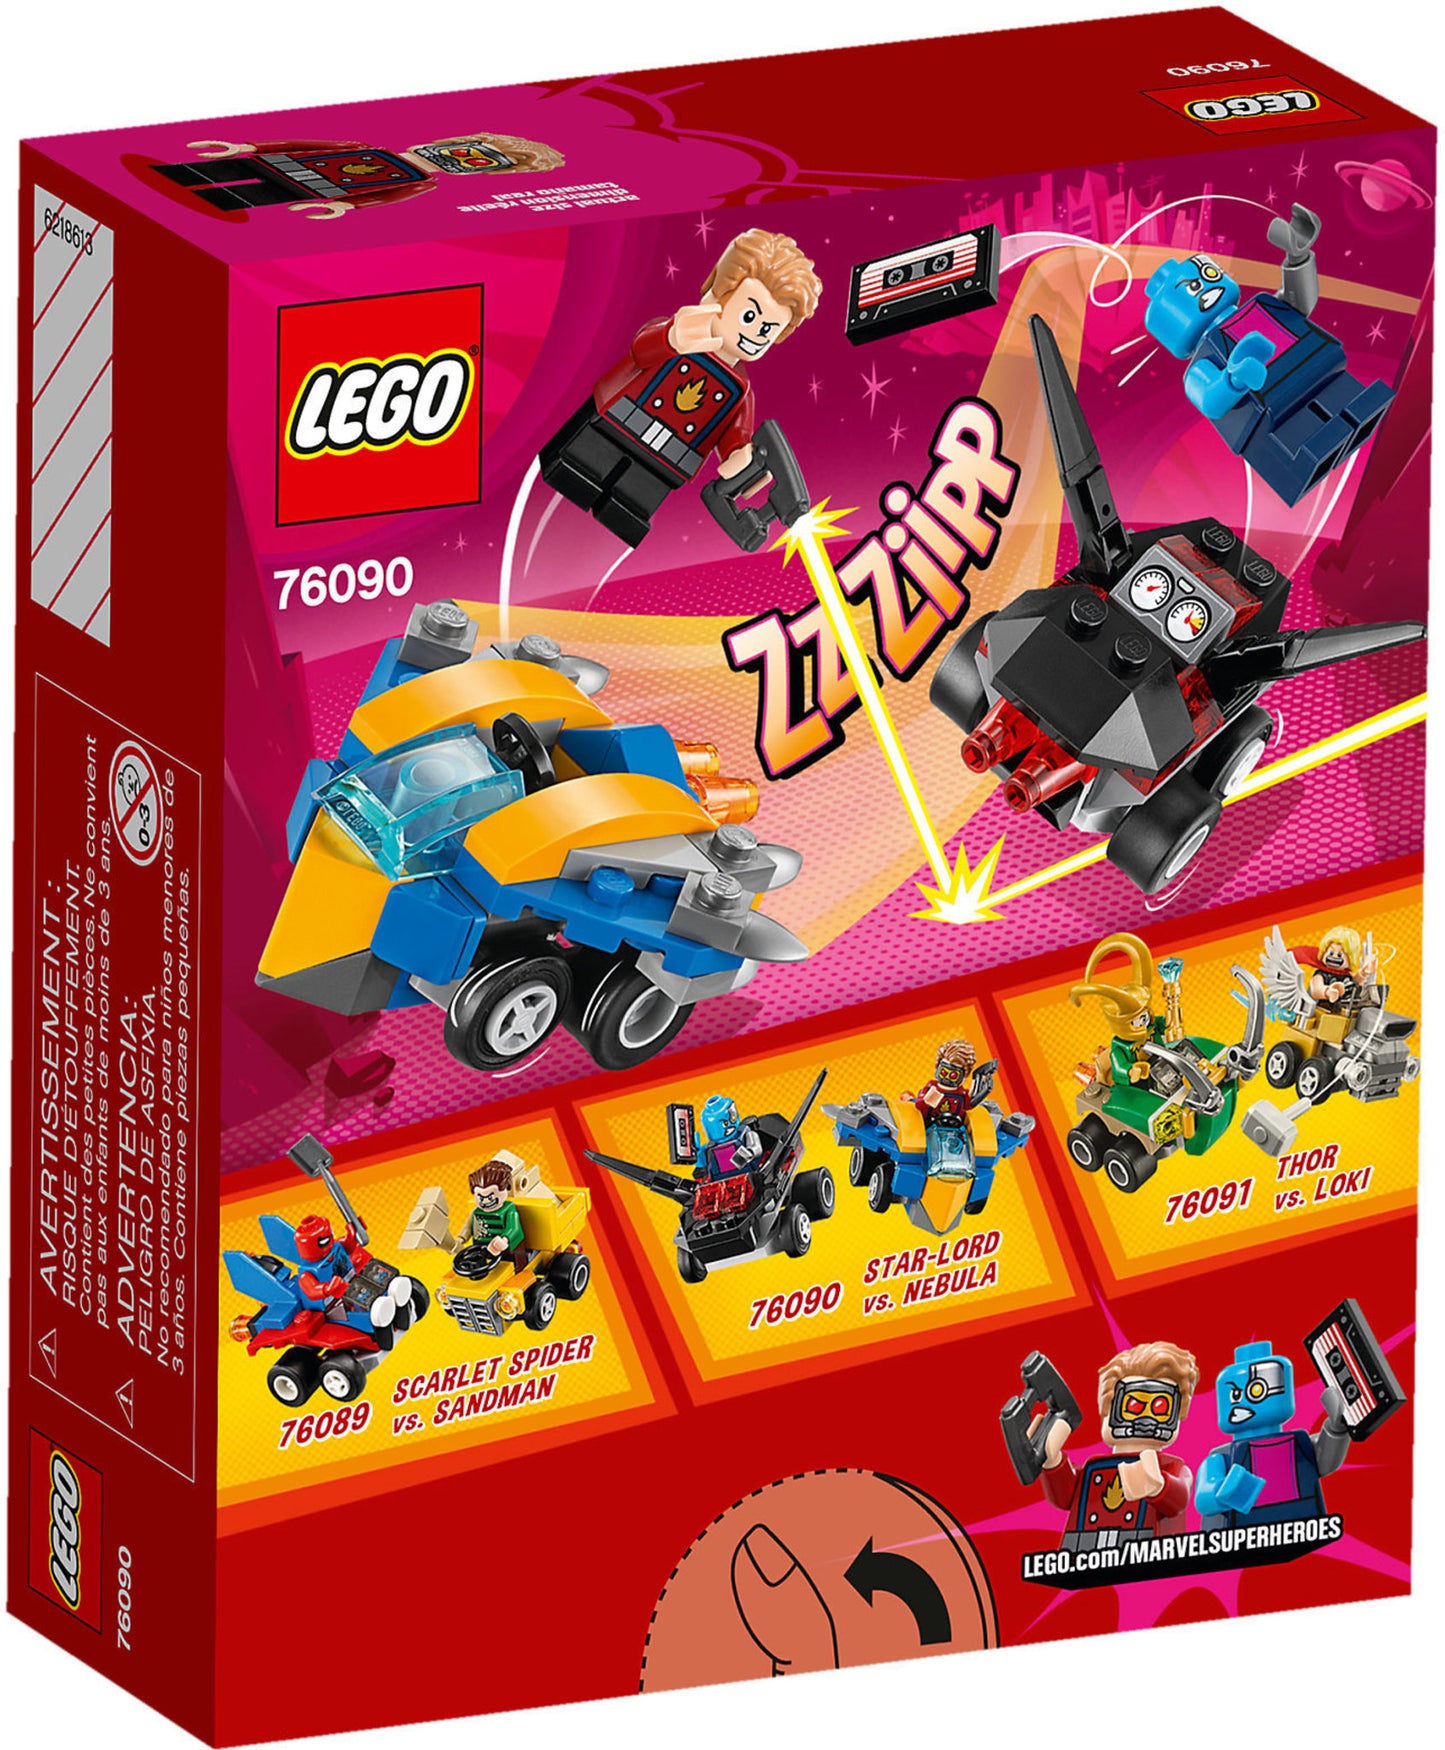 76090 LEGO Marvel Super Heroes - Mighty Micros: Star Lord Contro Nebula